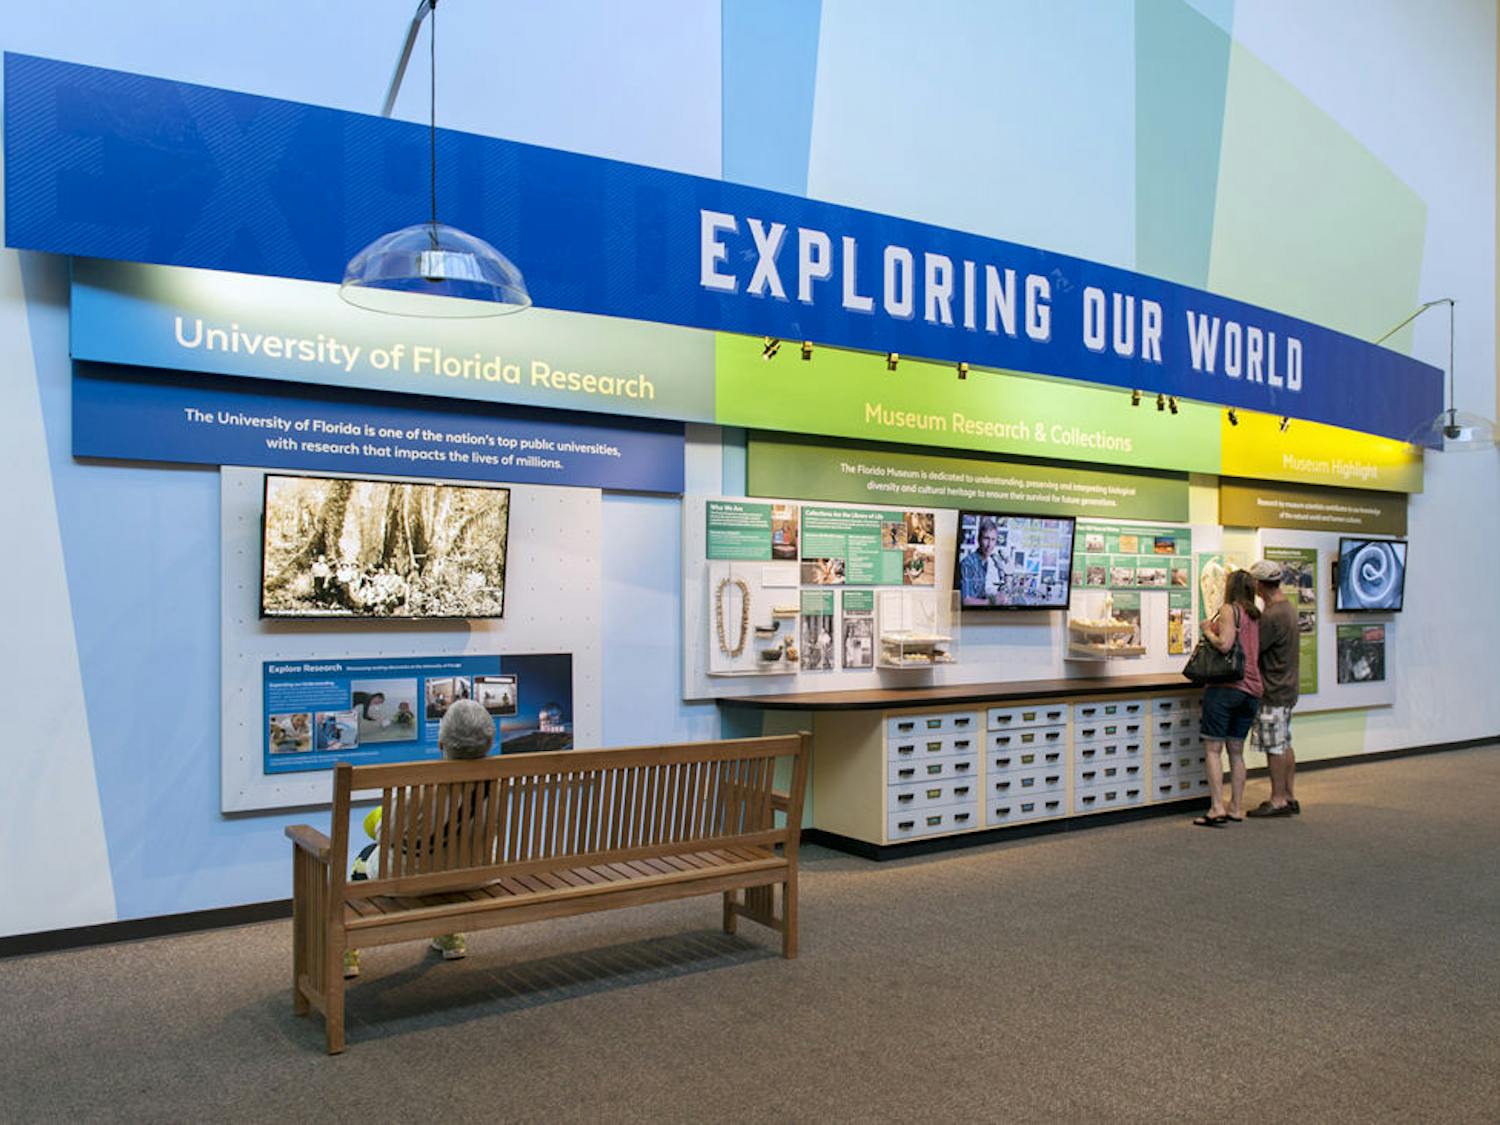 Pictured is the new permanent exhibit at the Florida Museum of Natural History titled “Exploring Our World.” The exhibit features different research initiatives led by UF and the museum over the years. Its content will be updated monthly to quarterly.